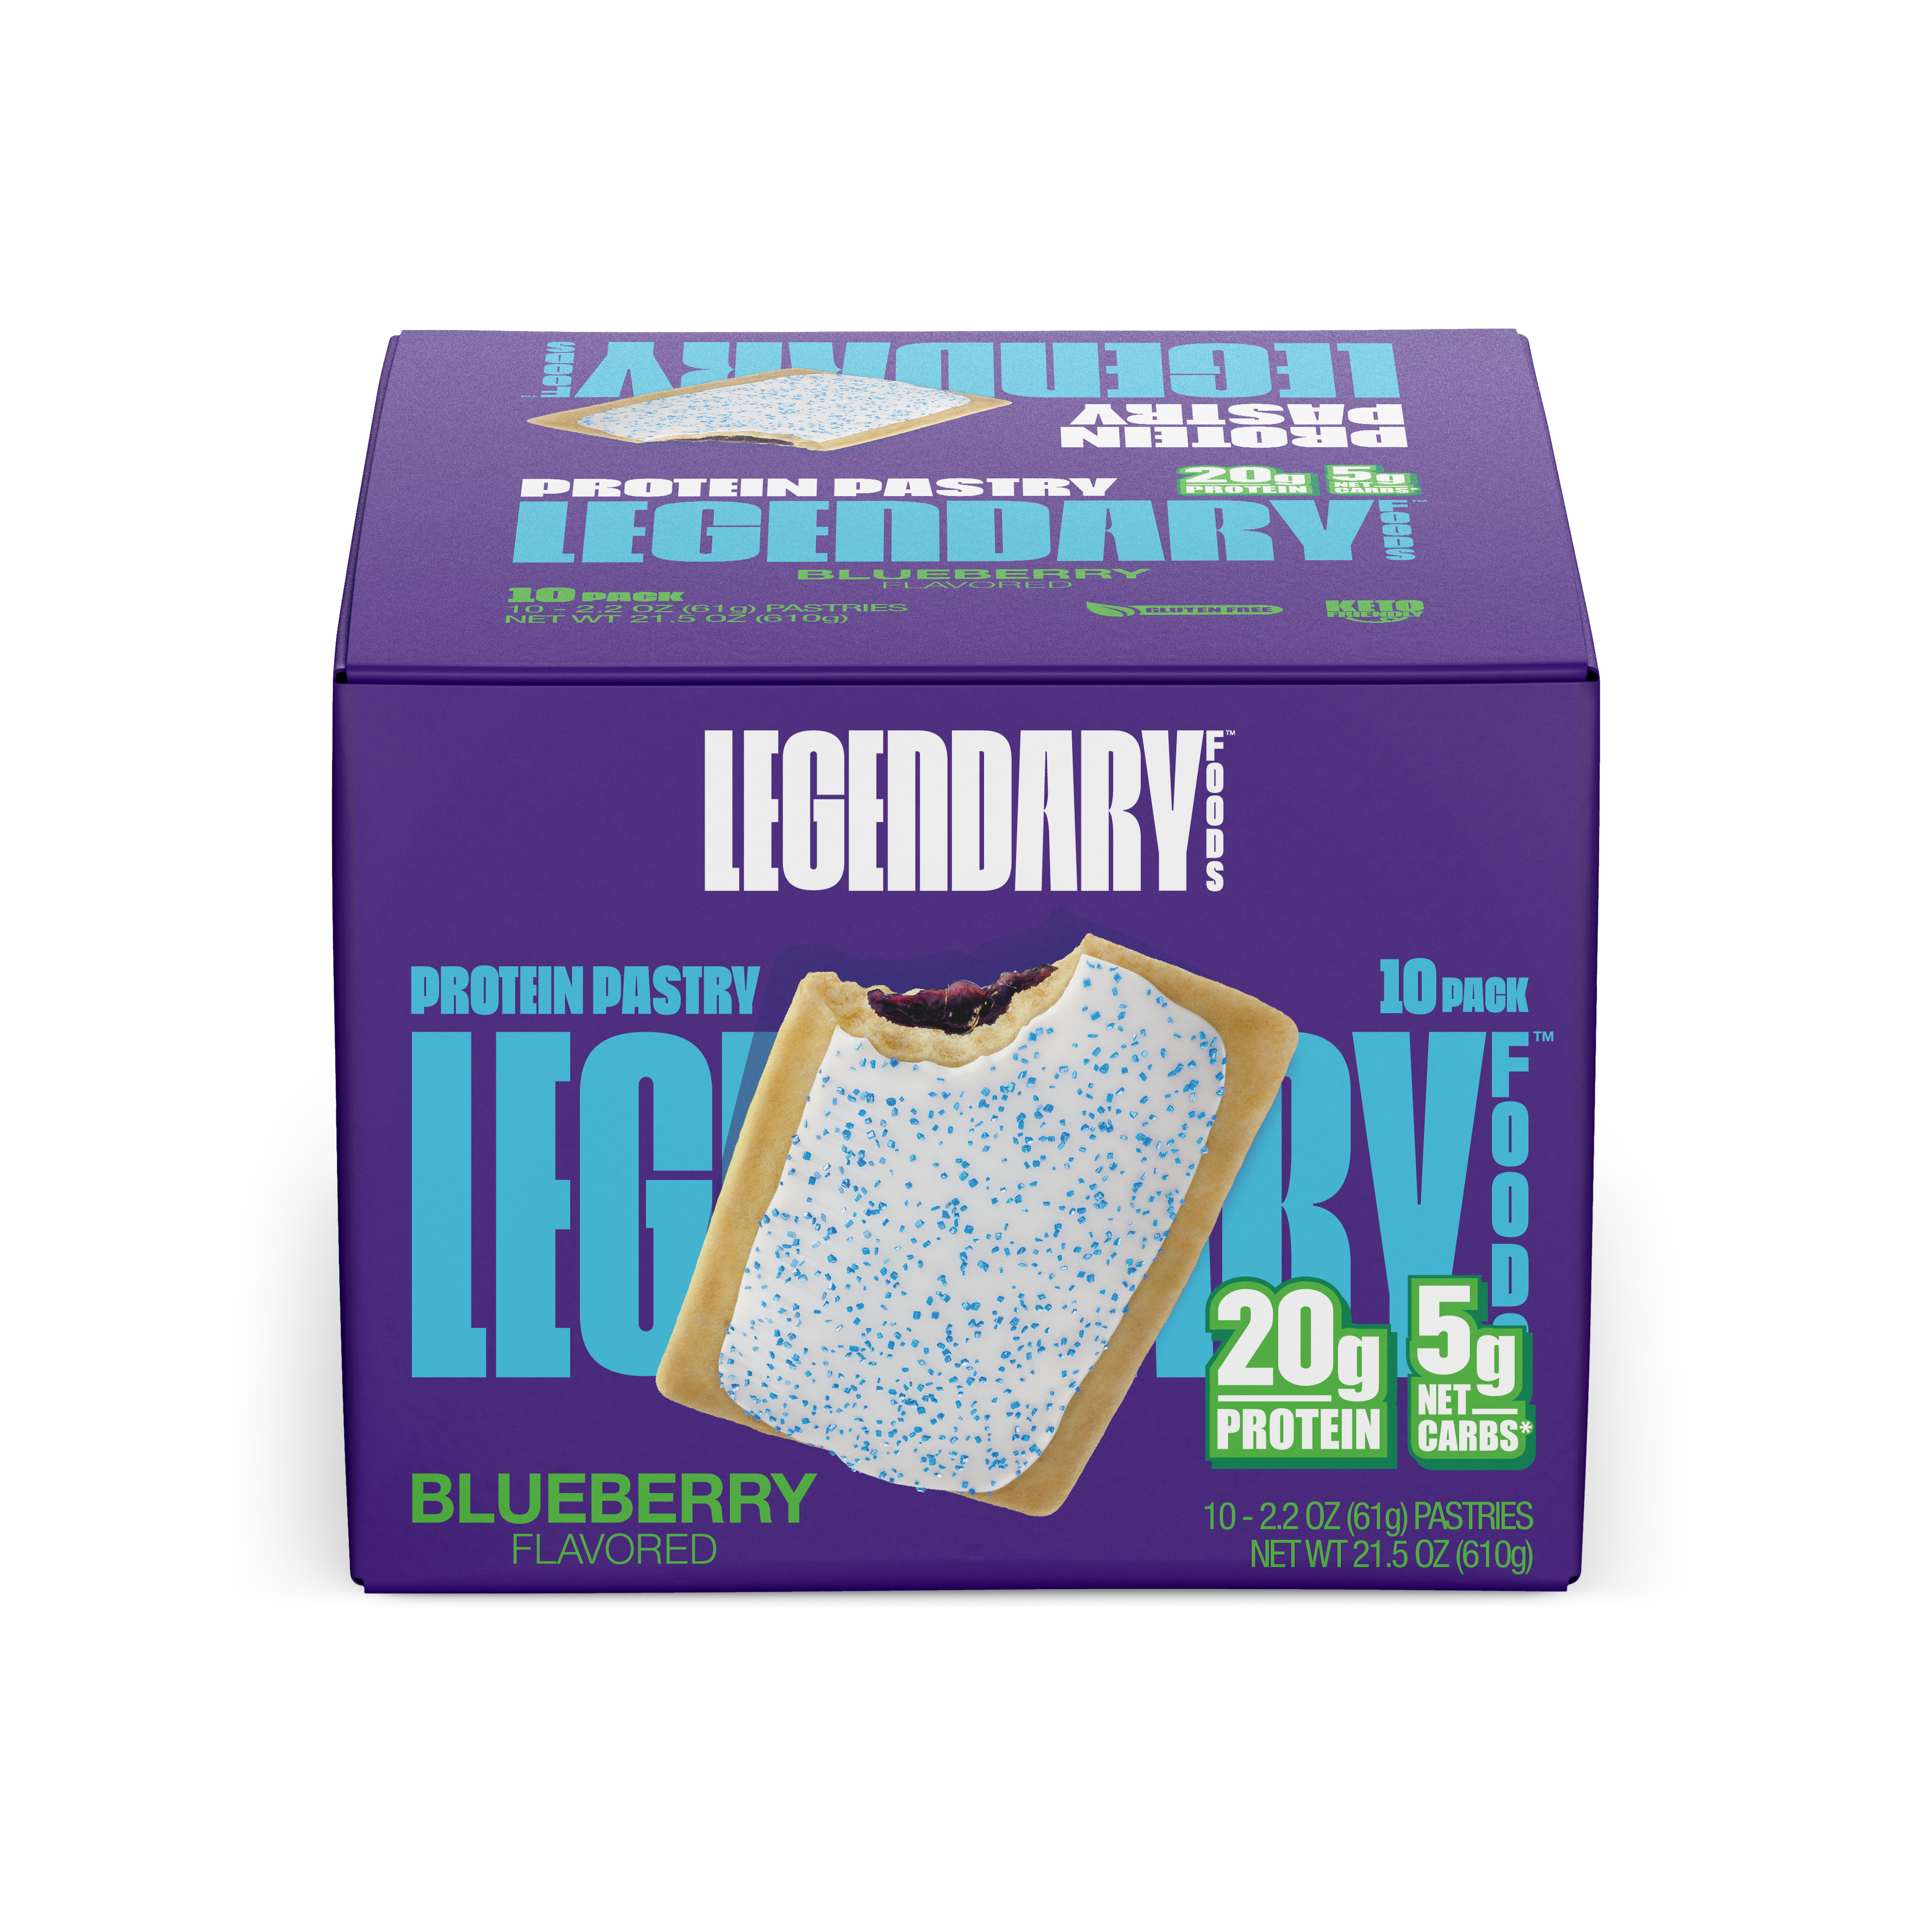 "Cake Style" Low-Carb Protein Pastry by Legendary Foods - Blueberry